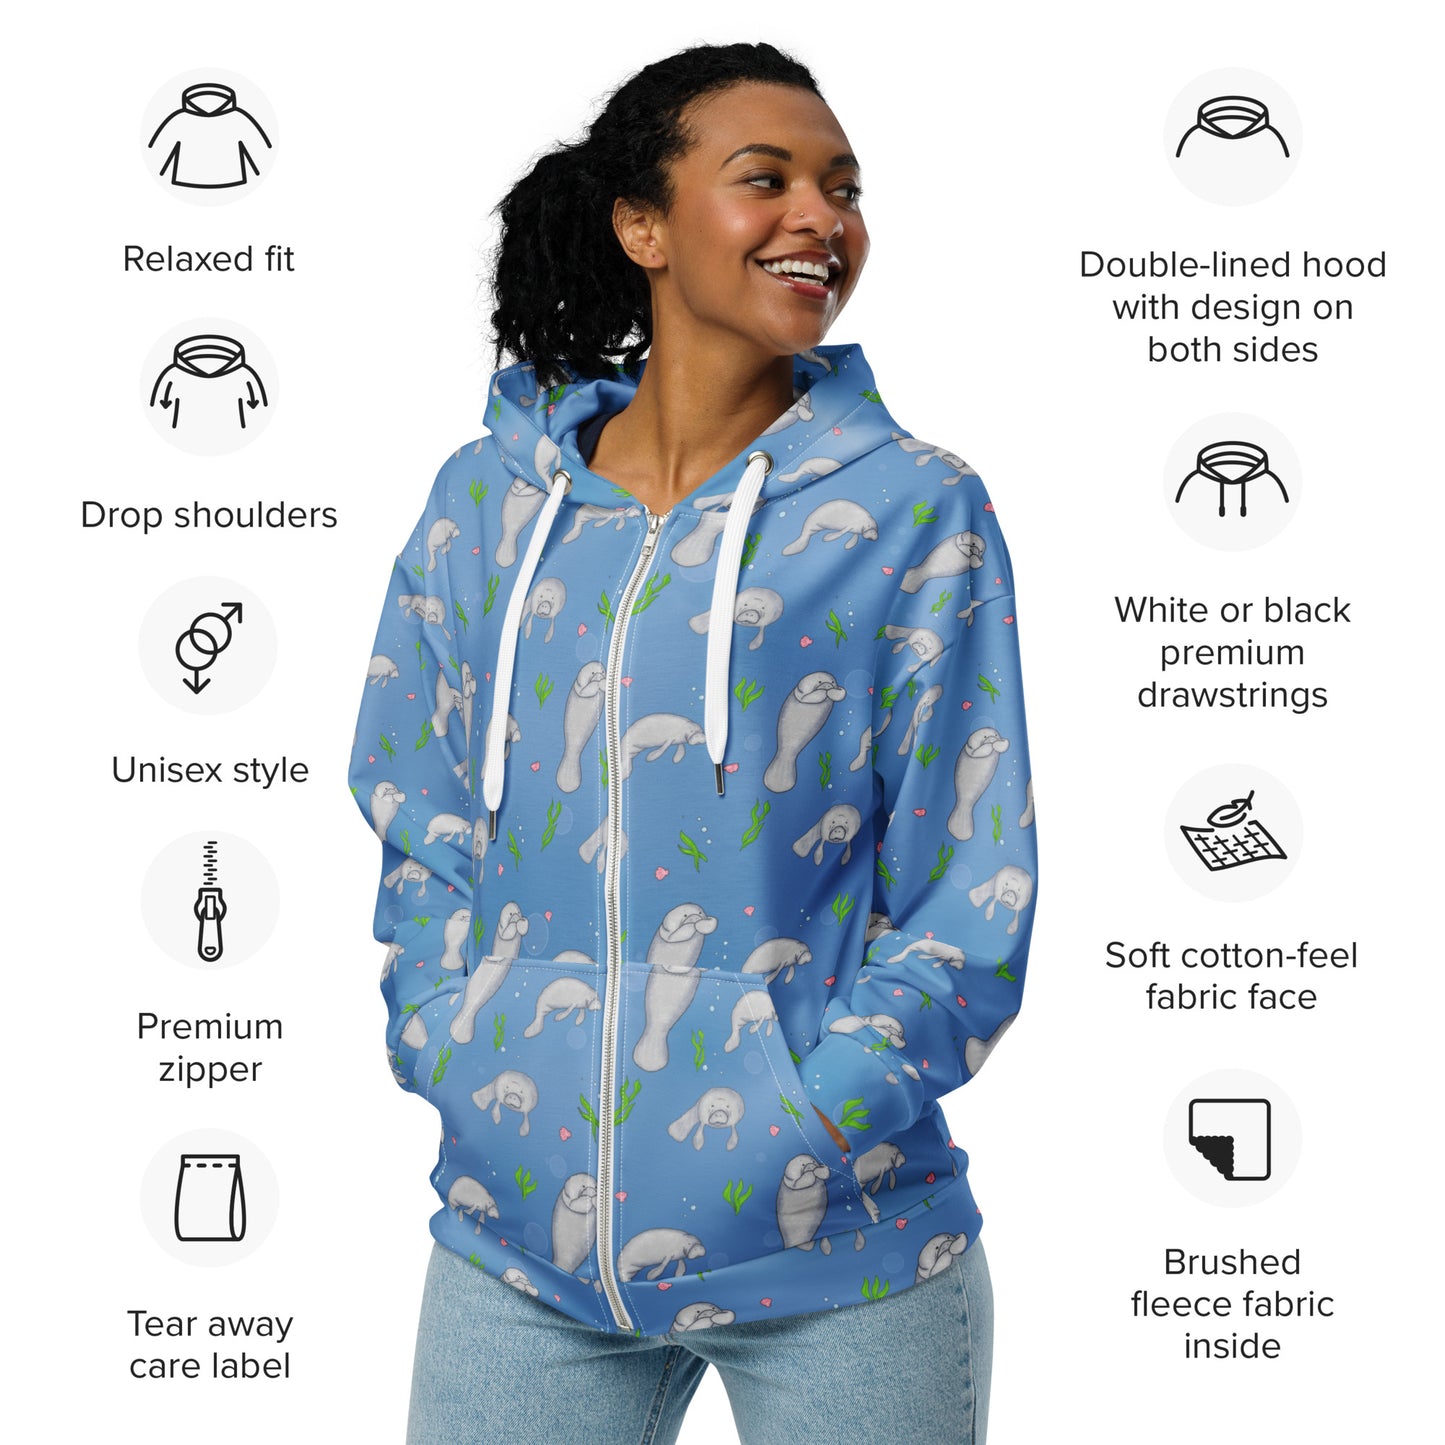 Unisex patterned manatee zip up hoodie. Made with recycled polyester. Soft cotton-feel outside fabric and fleece inside. Metal zipper, eyelets, and drawcord tips. Shown on female model.